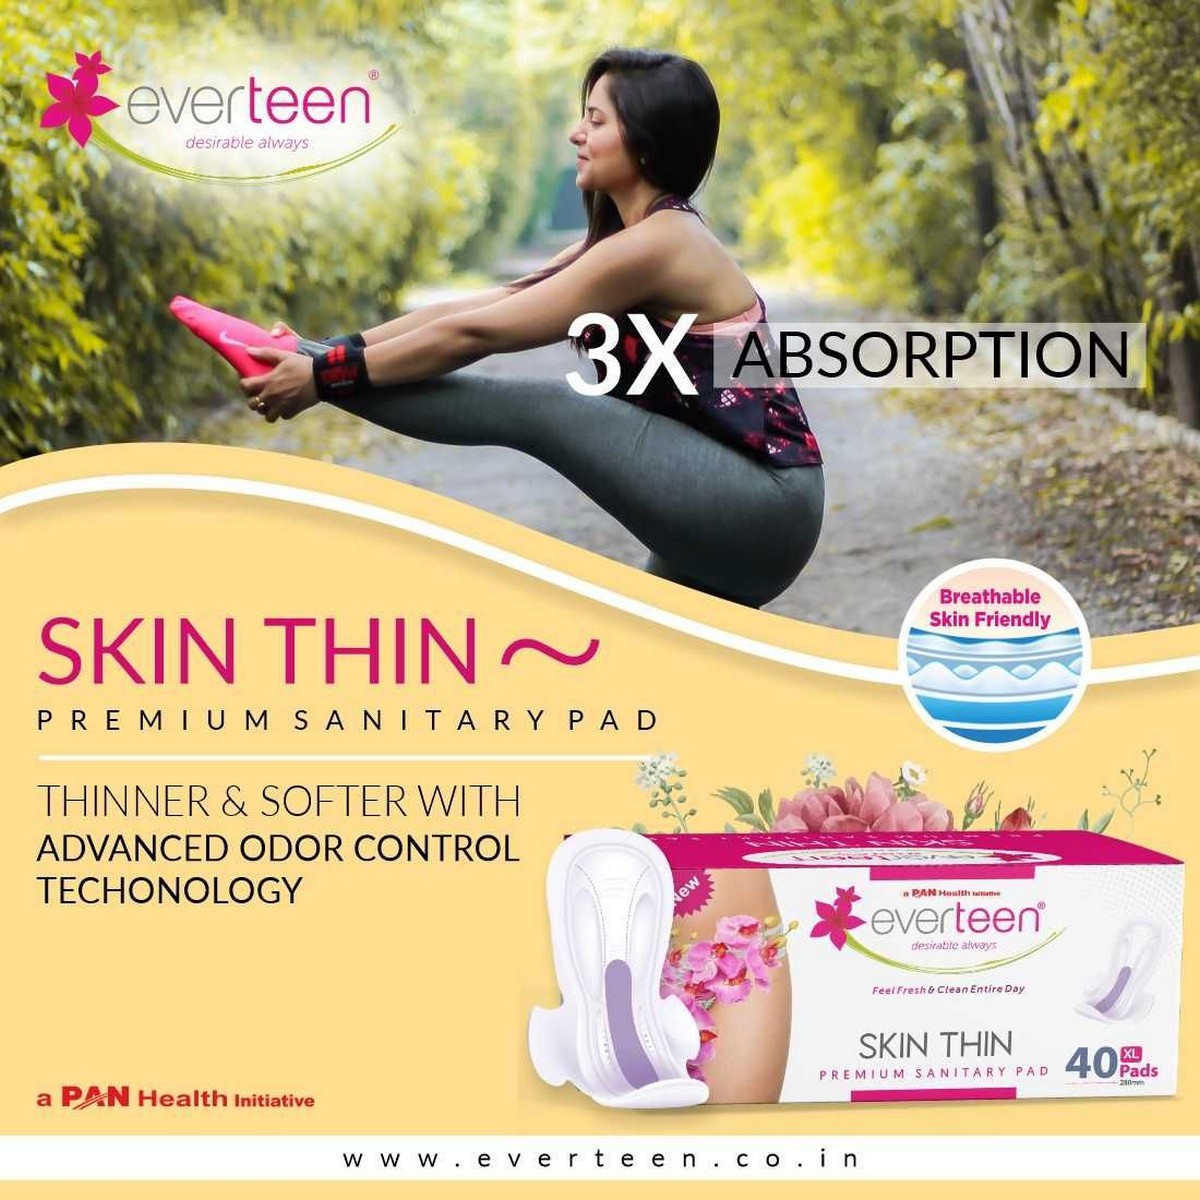 Everteen Skin Thin Premium XL Sanitary Pads 40Pieces  everteen SKIN THIN Premium XL Sanitary Pads for Protection During Periods in Women 1 Pack 40 Pads 280mm4